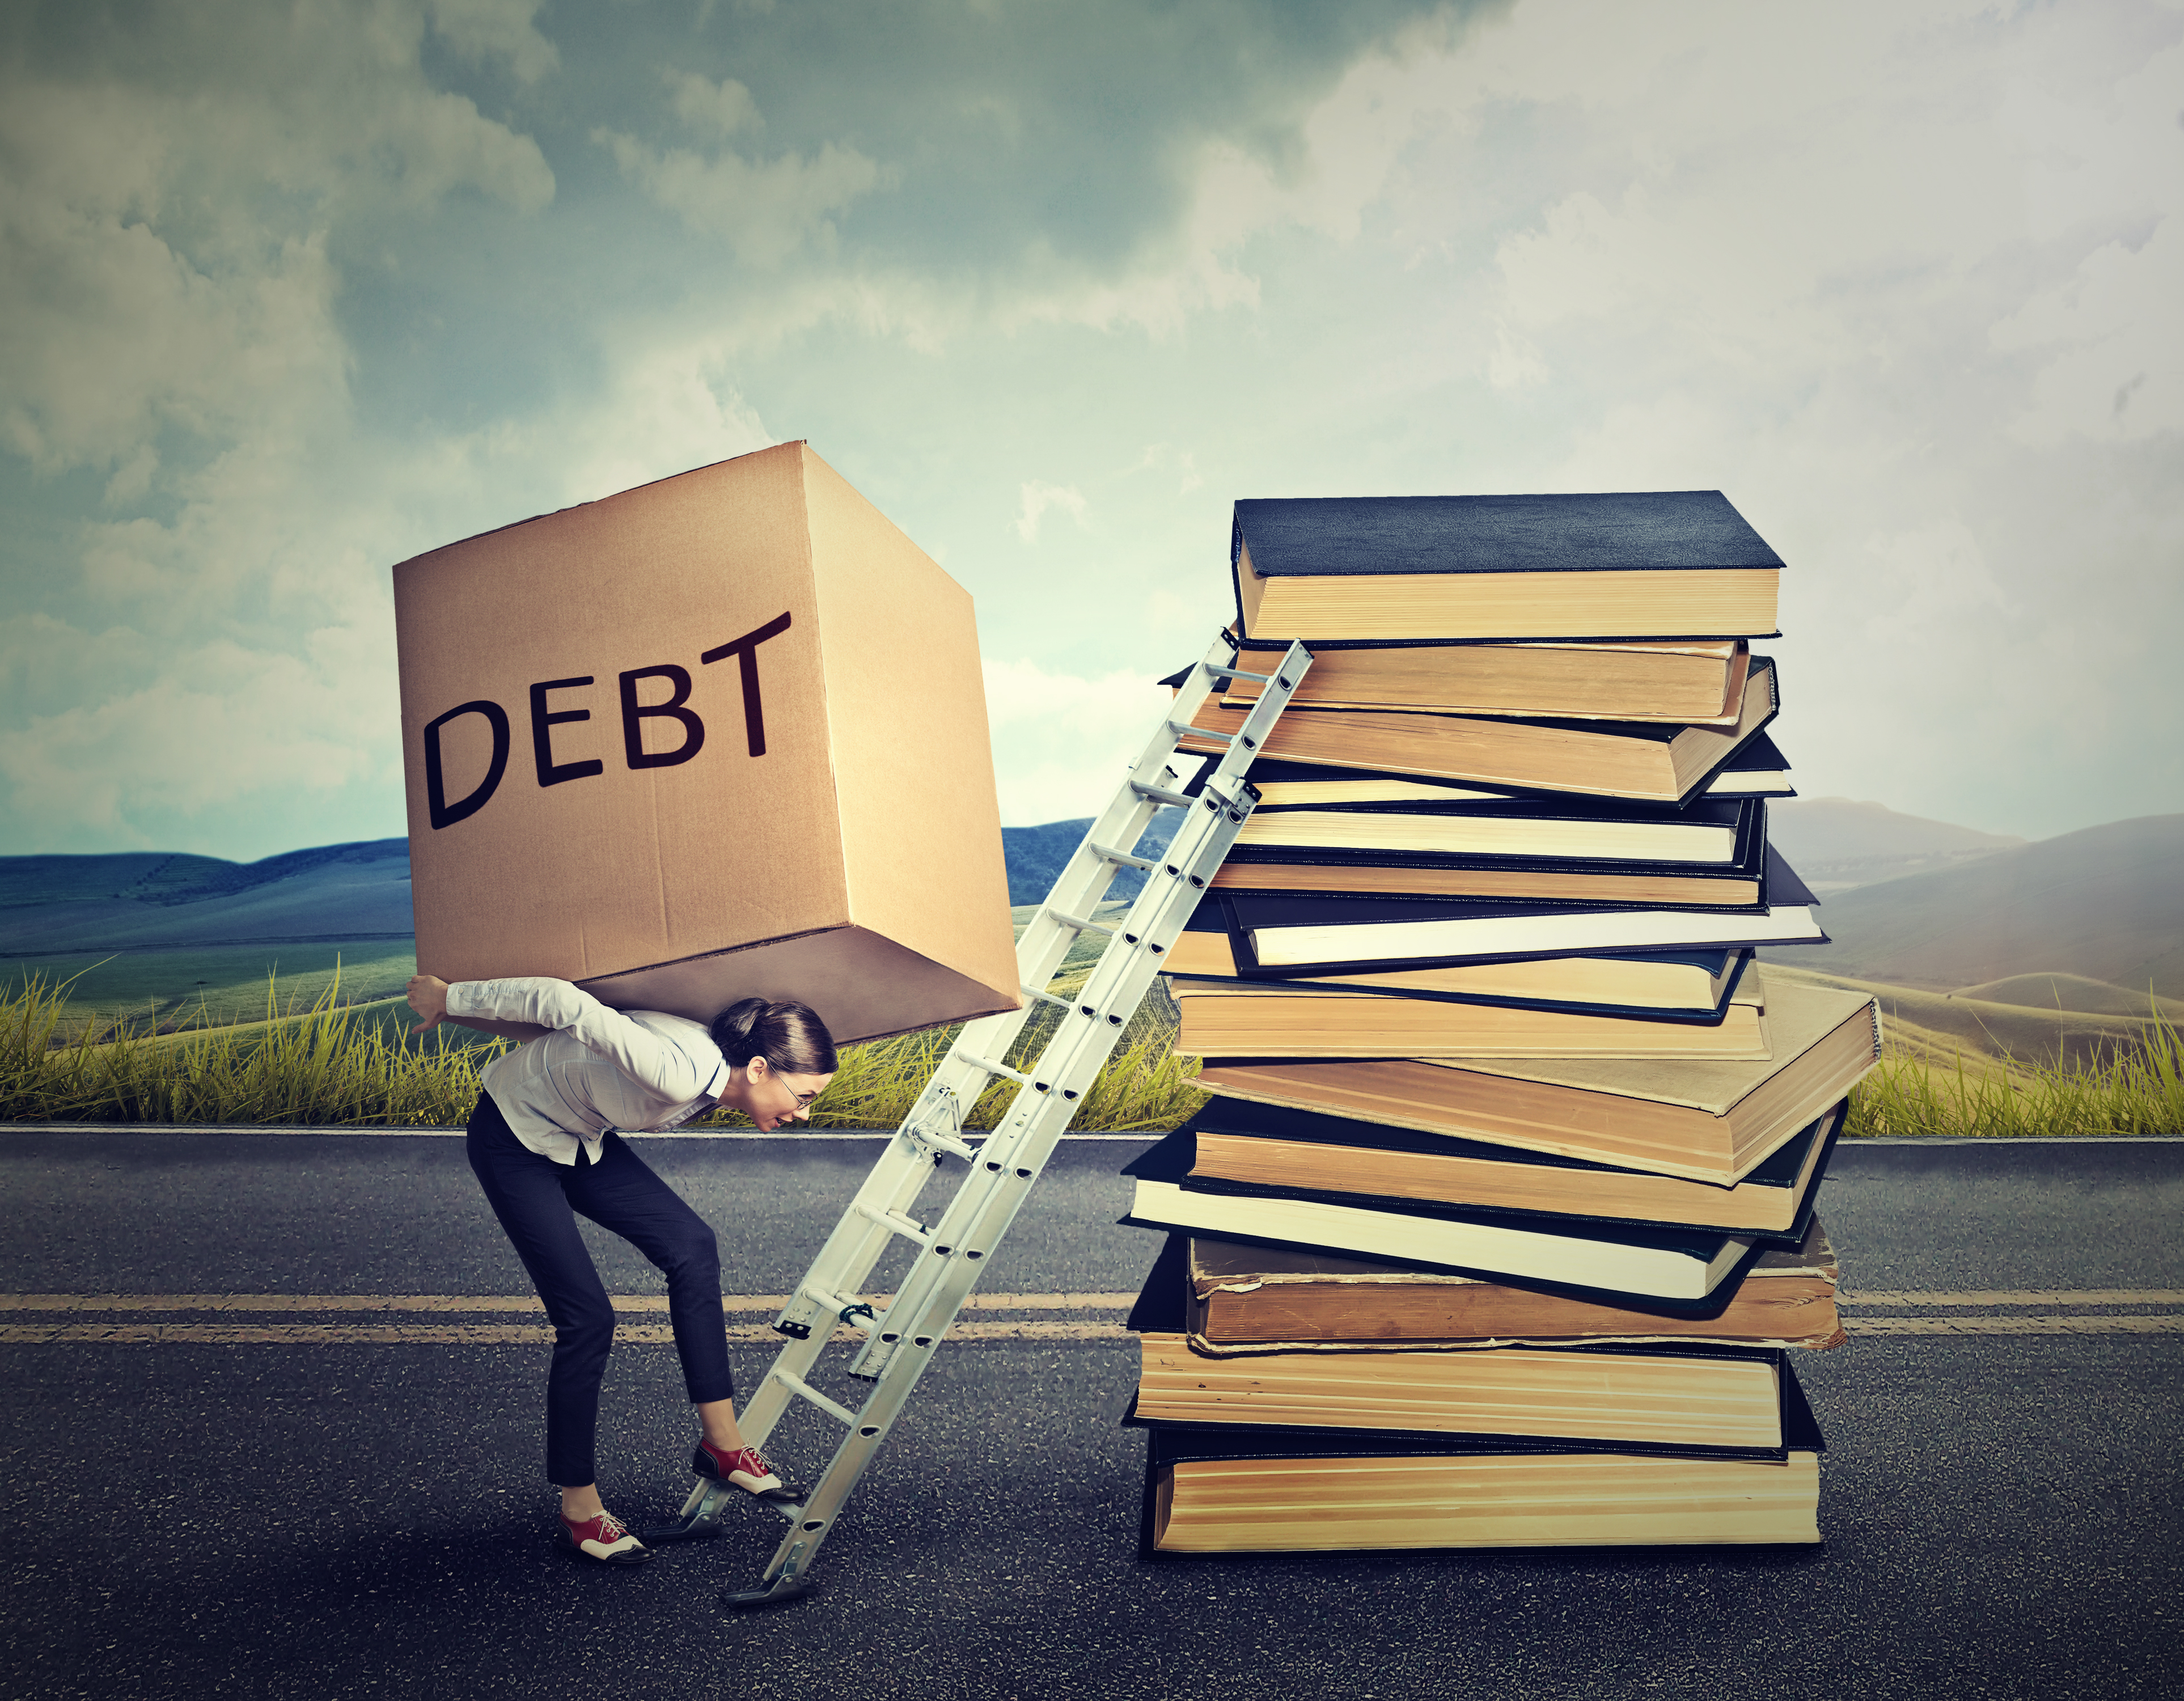 Get The Debt Relief You Need From National Student Aid Care. Call Us At 888-350-7549